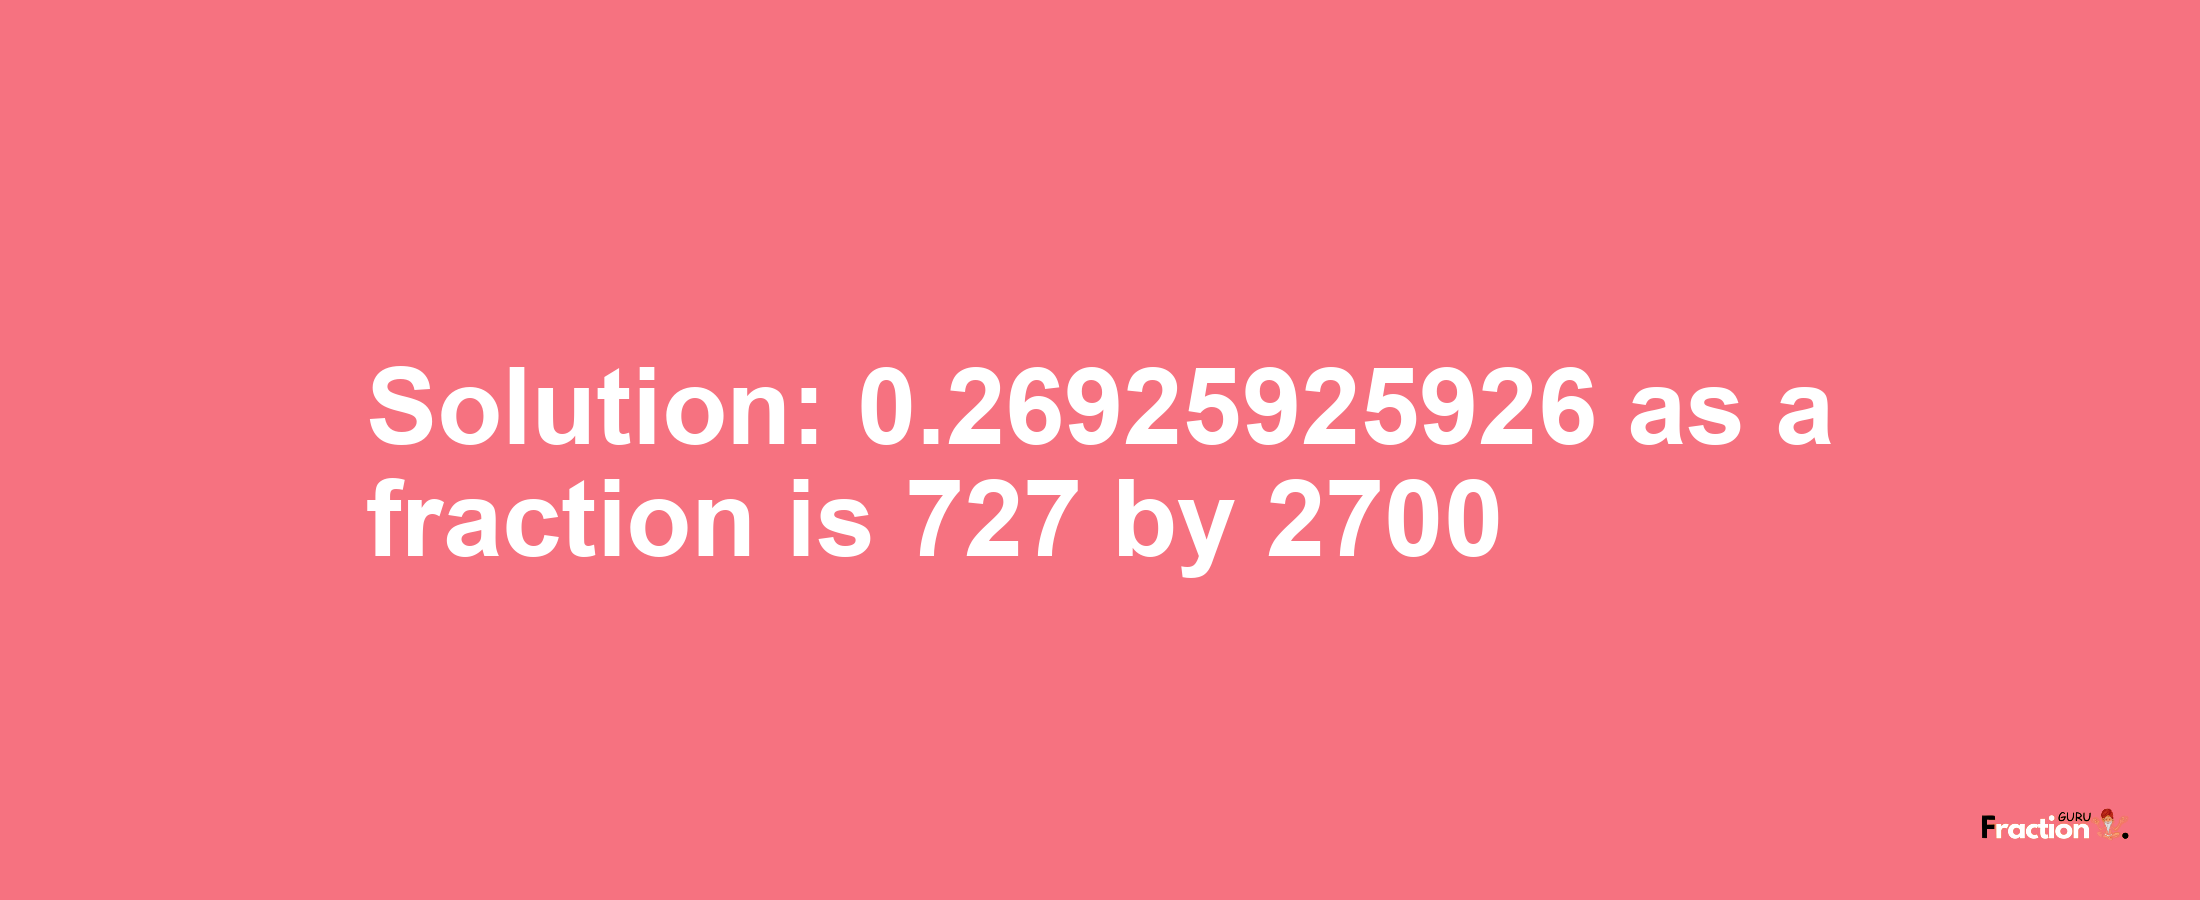 Solution:0.26925925926 as a fraction is 727/2700